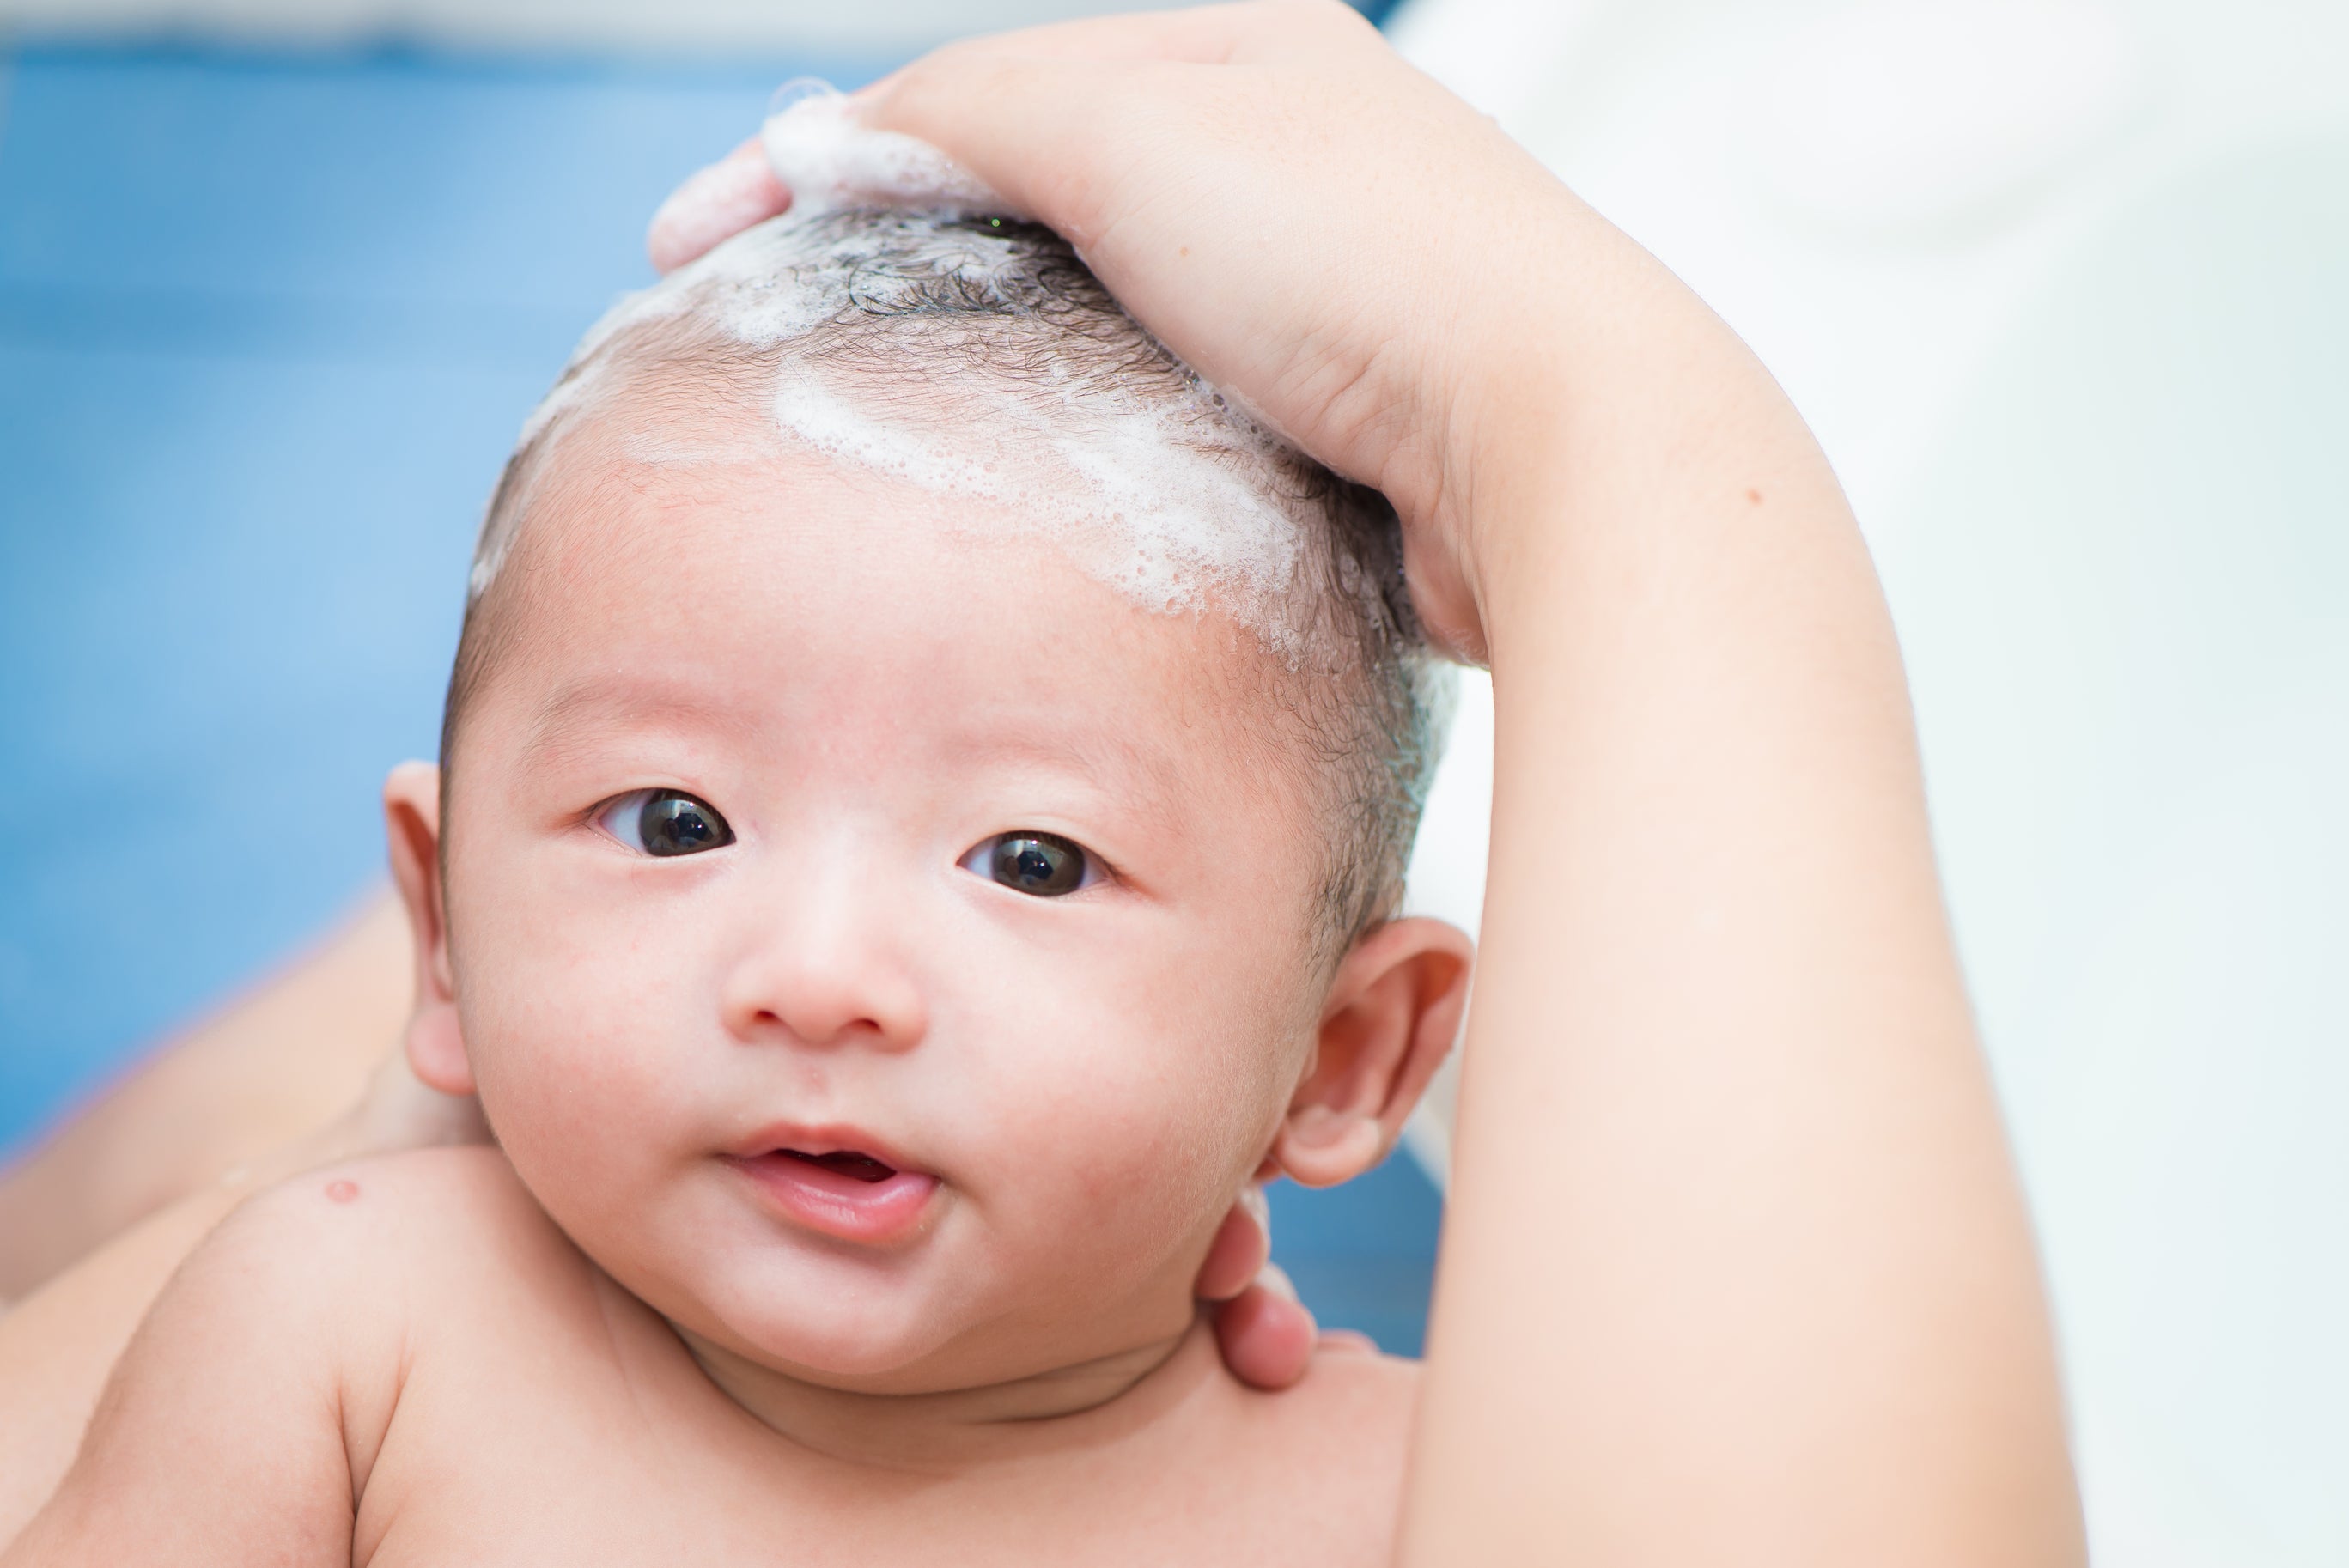 An Asian American baby under six months old being given a bath by the parent